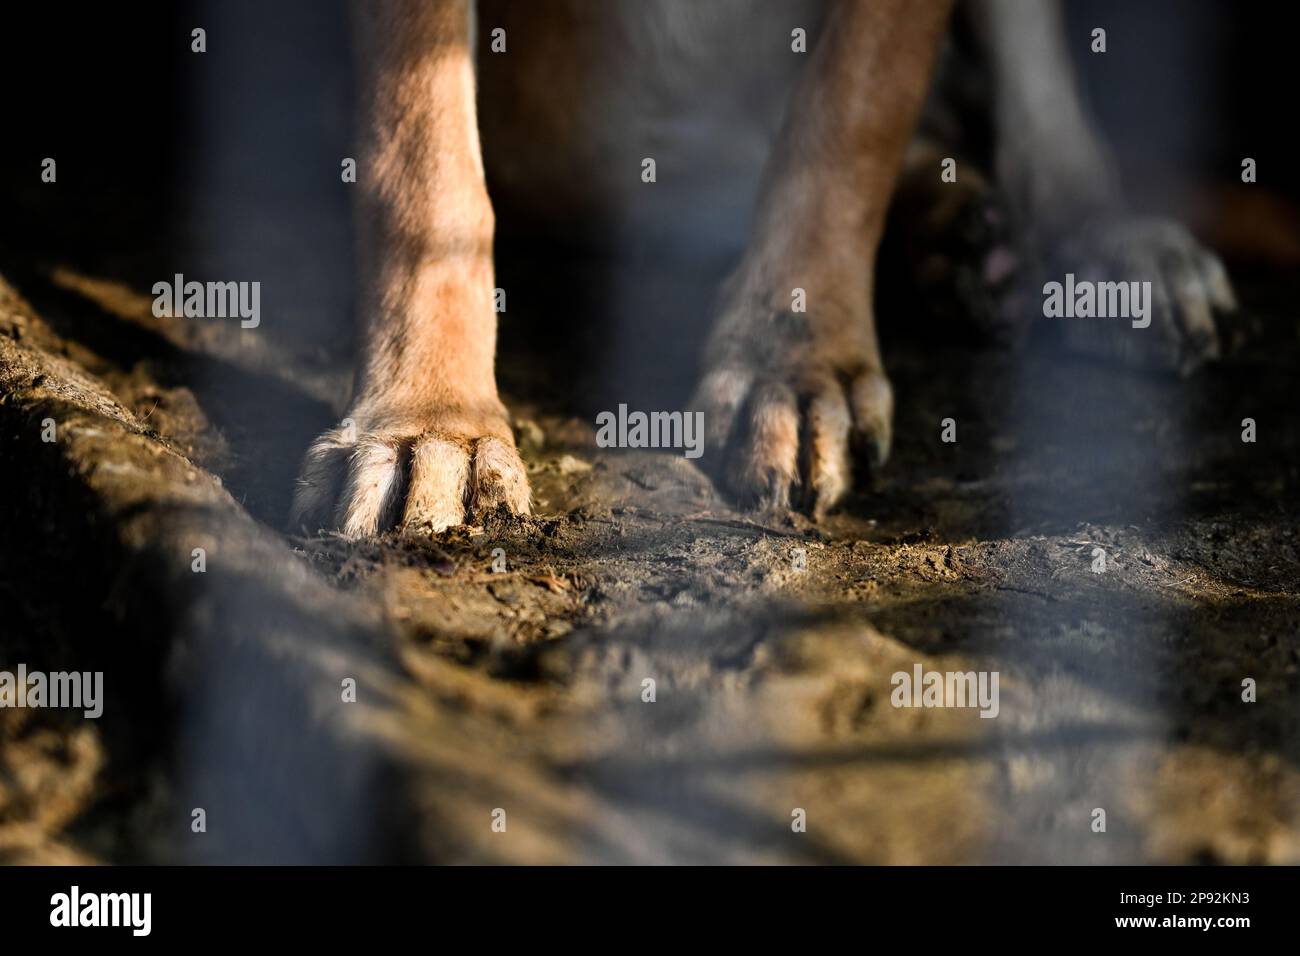 Asan, South Korea. 08th Mar, 2023. A dog's paws are seen in a filthy cage at a dog meat farm in Asan, South Korea, on Tuesday, March 7, 2023. The farm is closing as the dog meat trade continues to decline amid changing social attitudes and health concerns. Photo by Thomas Maresca/UPI Credit: UPI/Alamy Live News Stock Photo